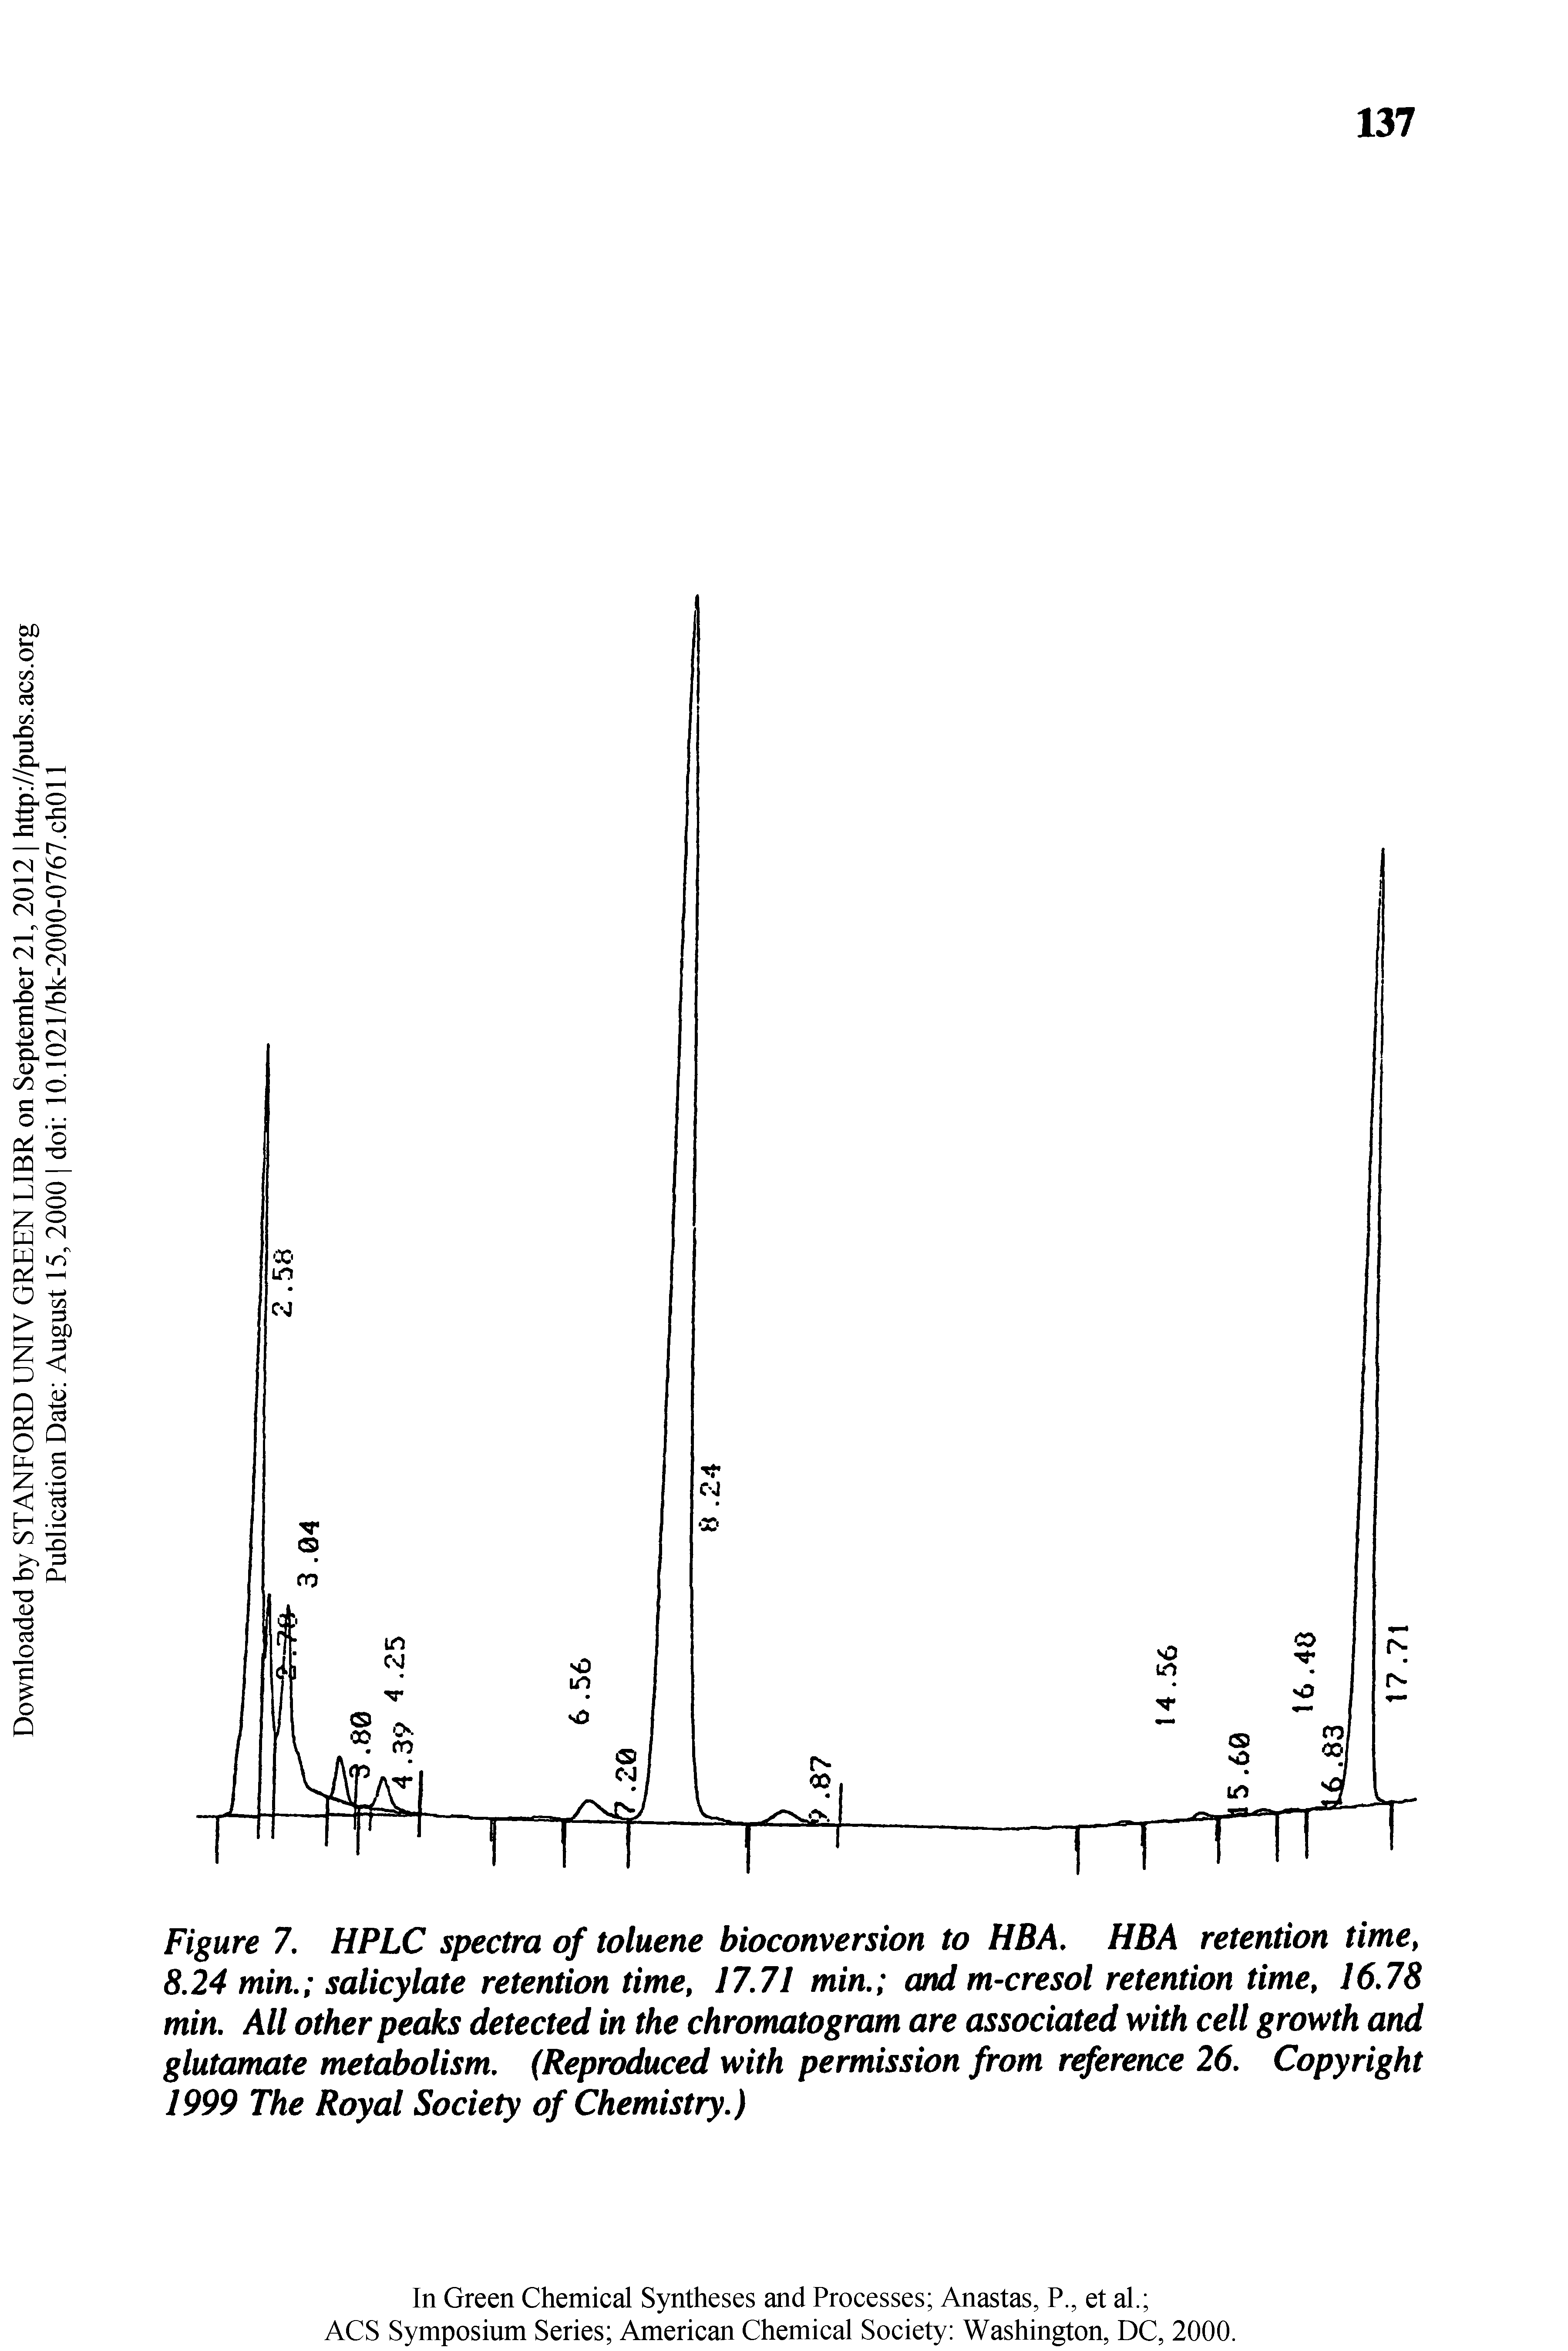 Figure 7, HPLC spectra of toluene bioconversion to HBA, HBA retention time, 8,24 min, salicylate retention time, 17,71 min, and m-cresol retention time, 16,78 min. All other peaks detected in the chromatogram are associated with cell growth and glutamate metabolism, (Reproduced with permission from reference 26, Copyright 1999 The Royal Society of Chemistry,)...